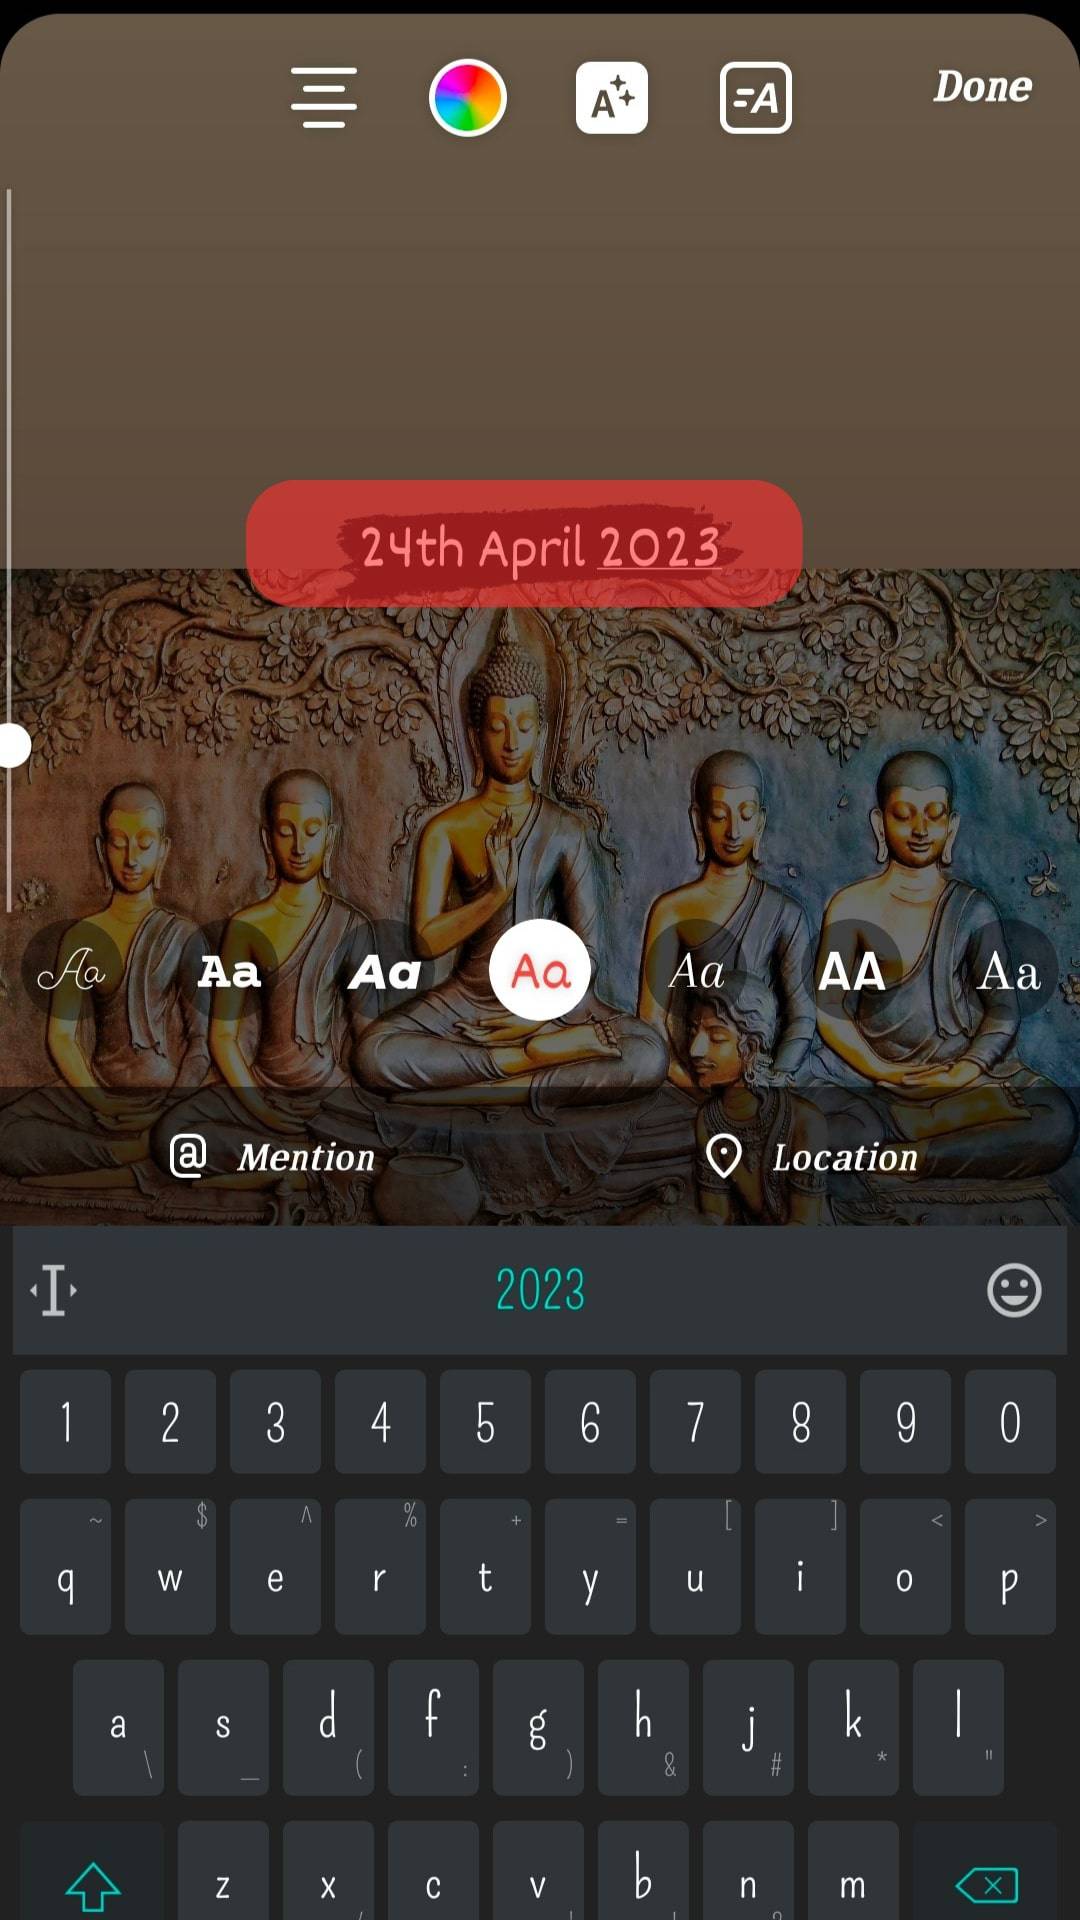 Type In The Date To Display On Story